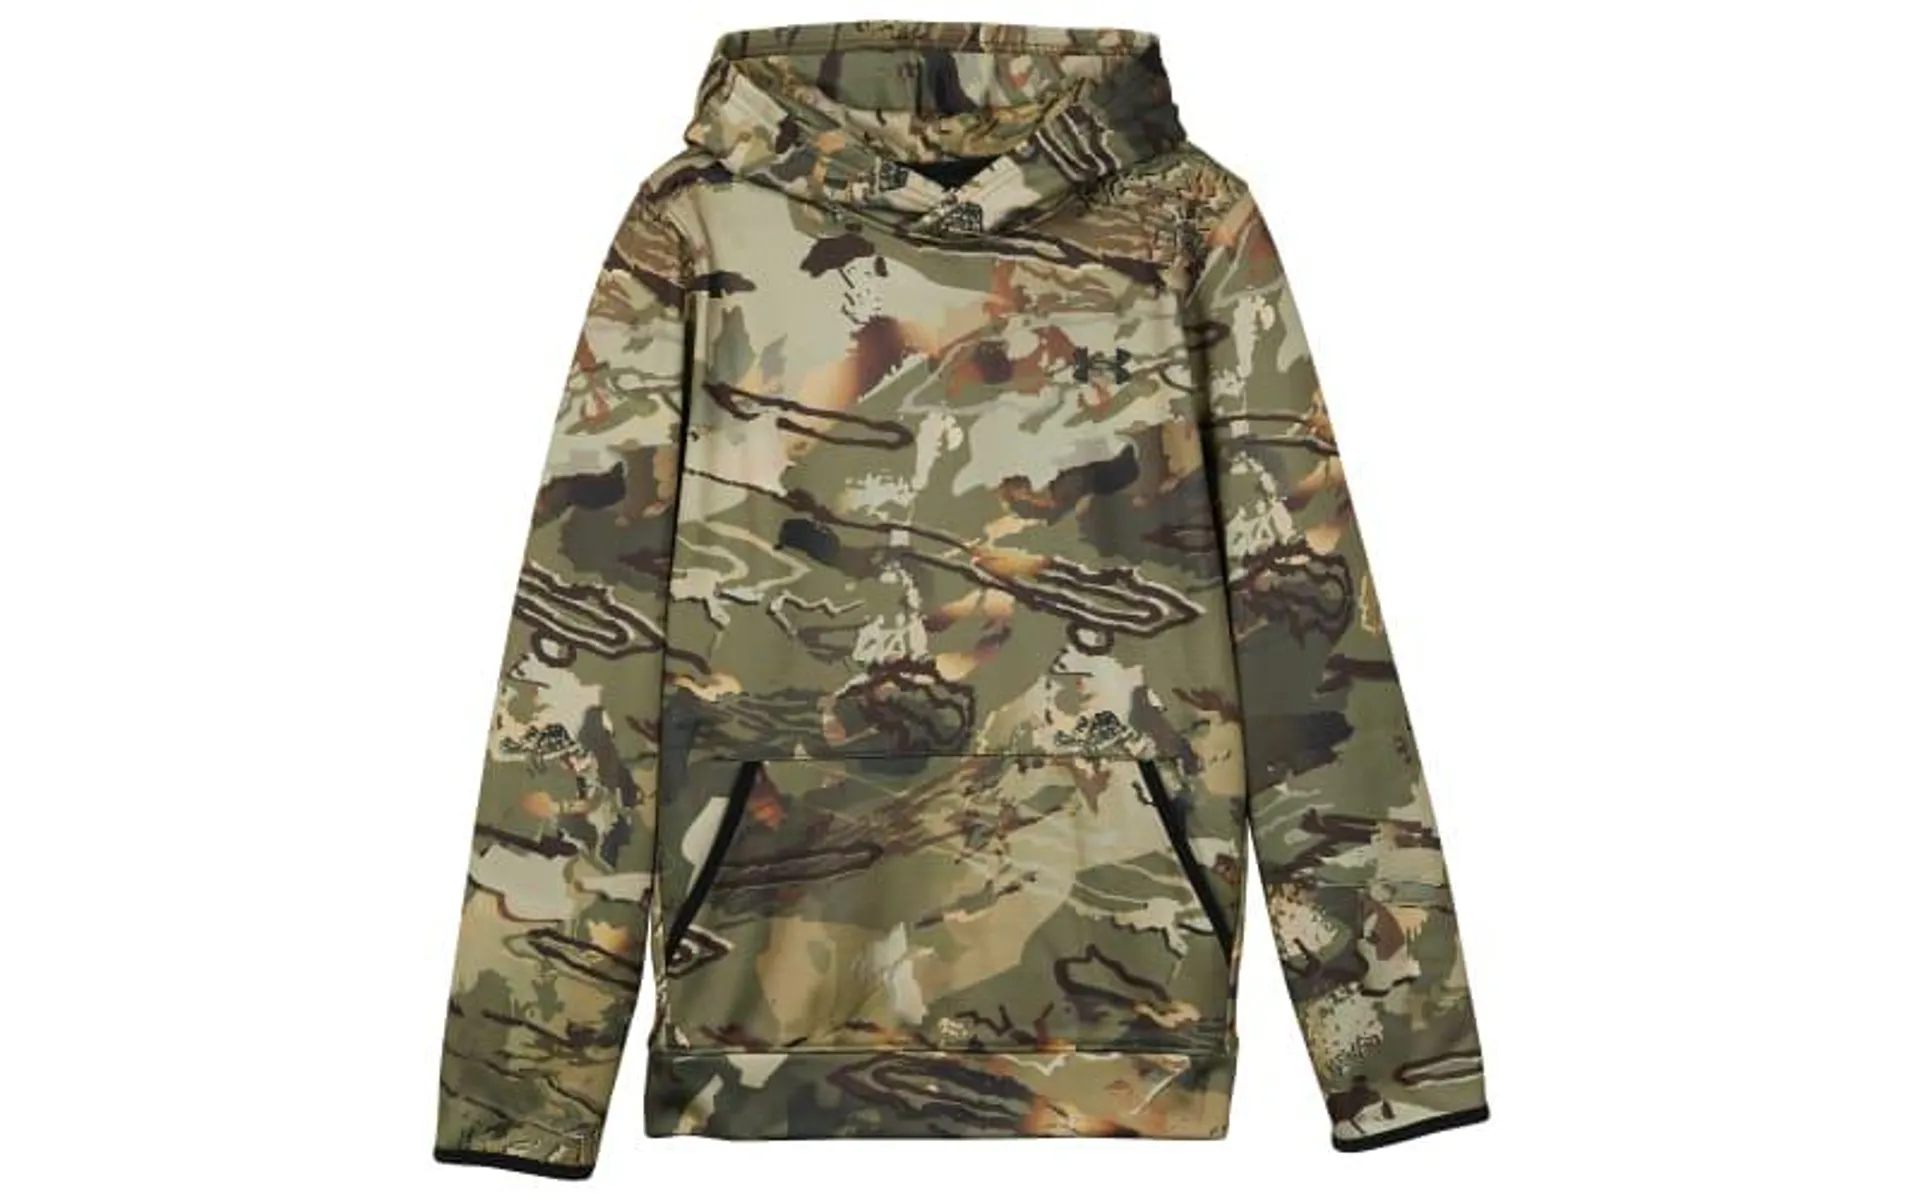 Under Armour Forest All-Season Long-Sleeve Hoodie for Kids